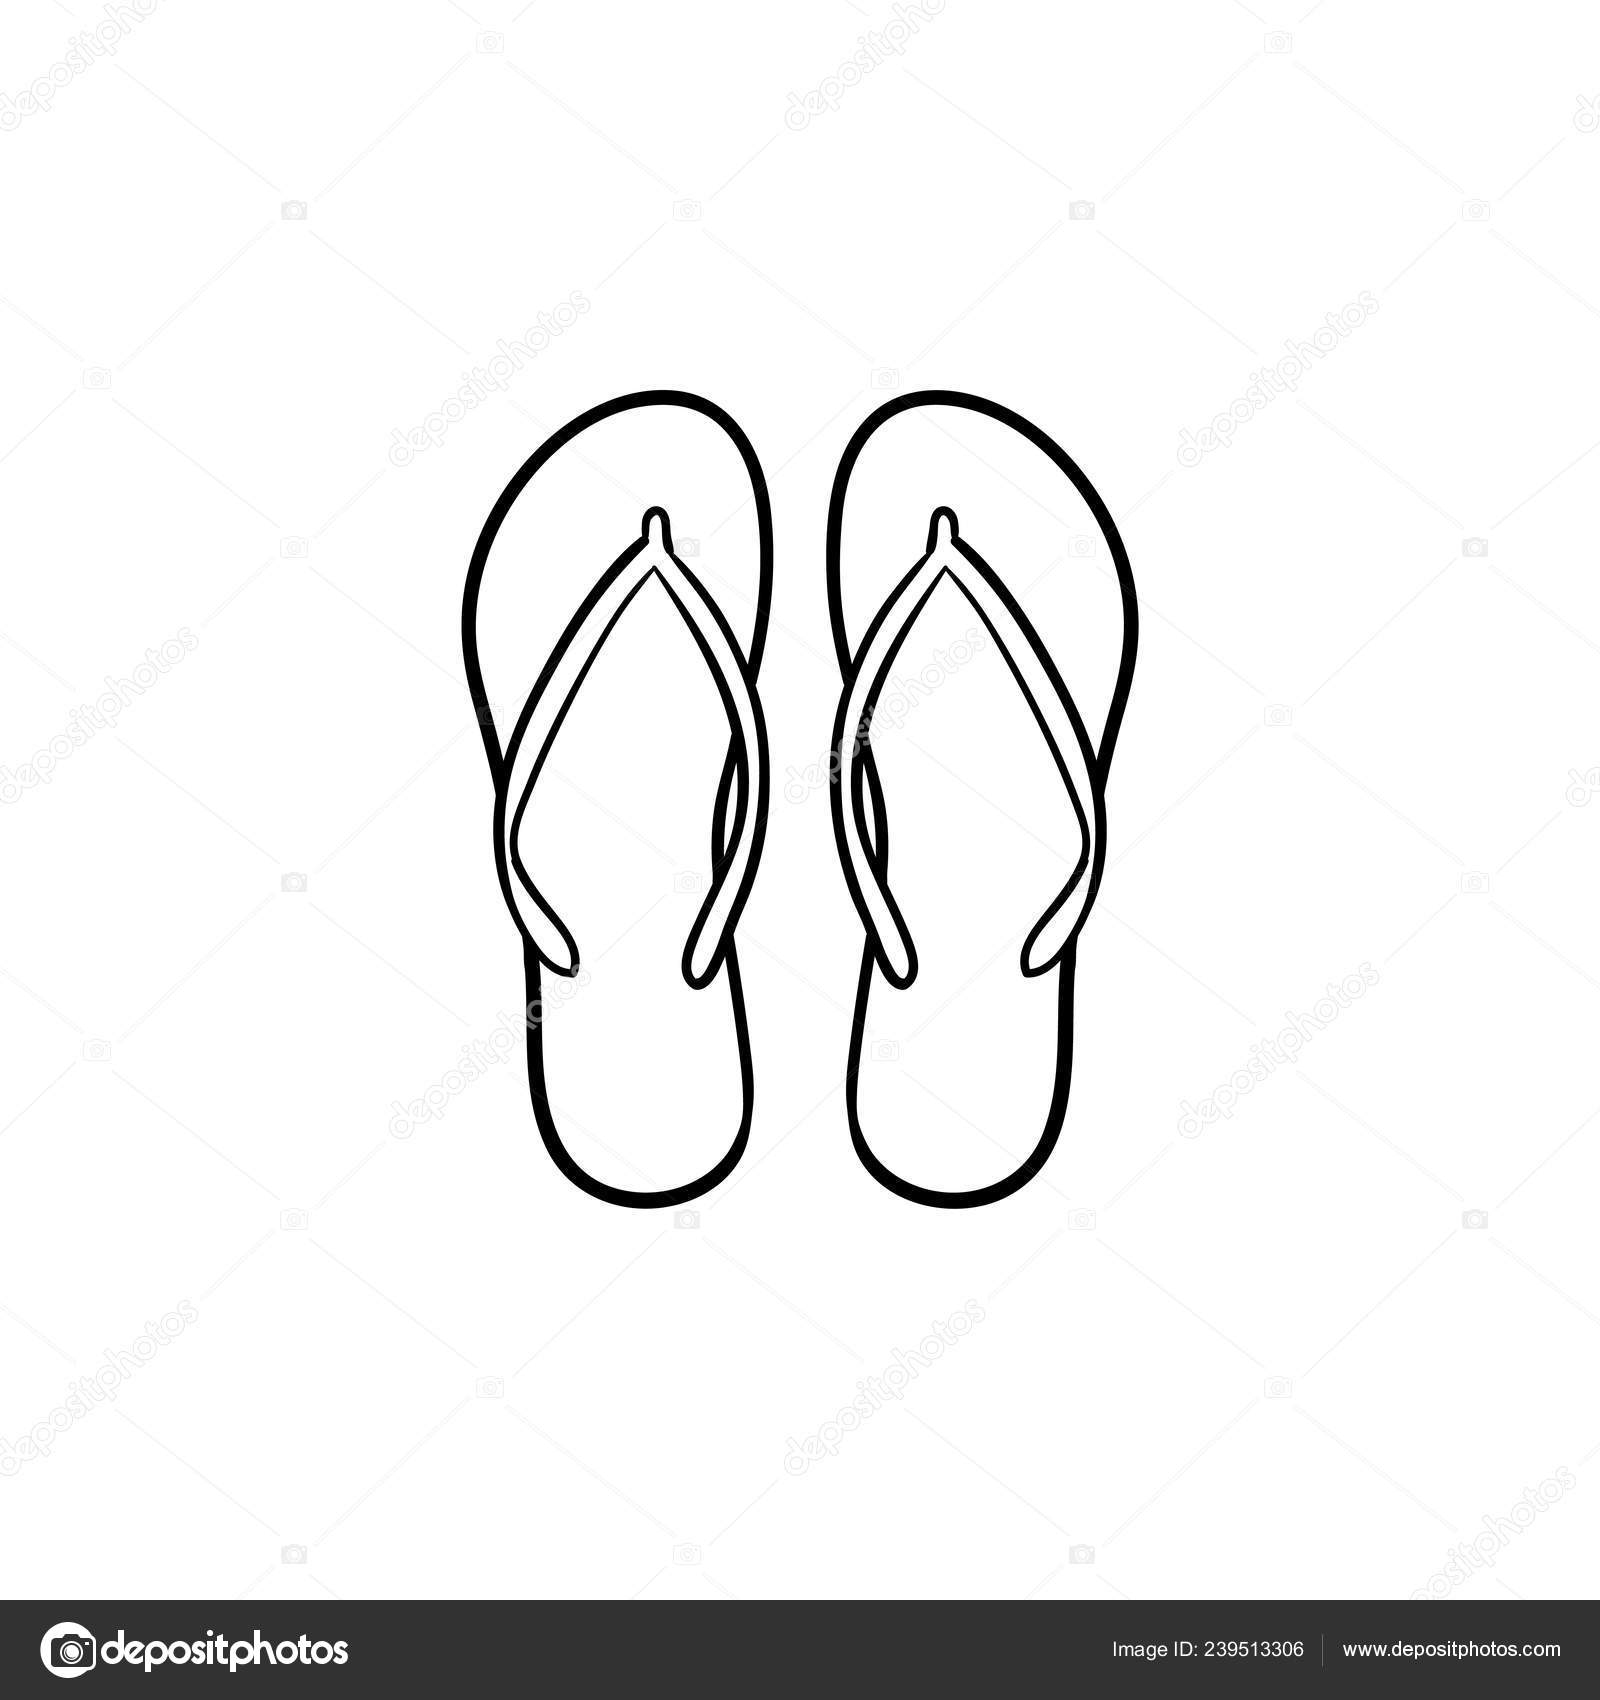 Pair of flip flop slippers hand drawn 